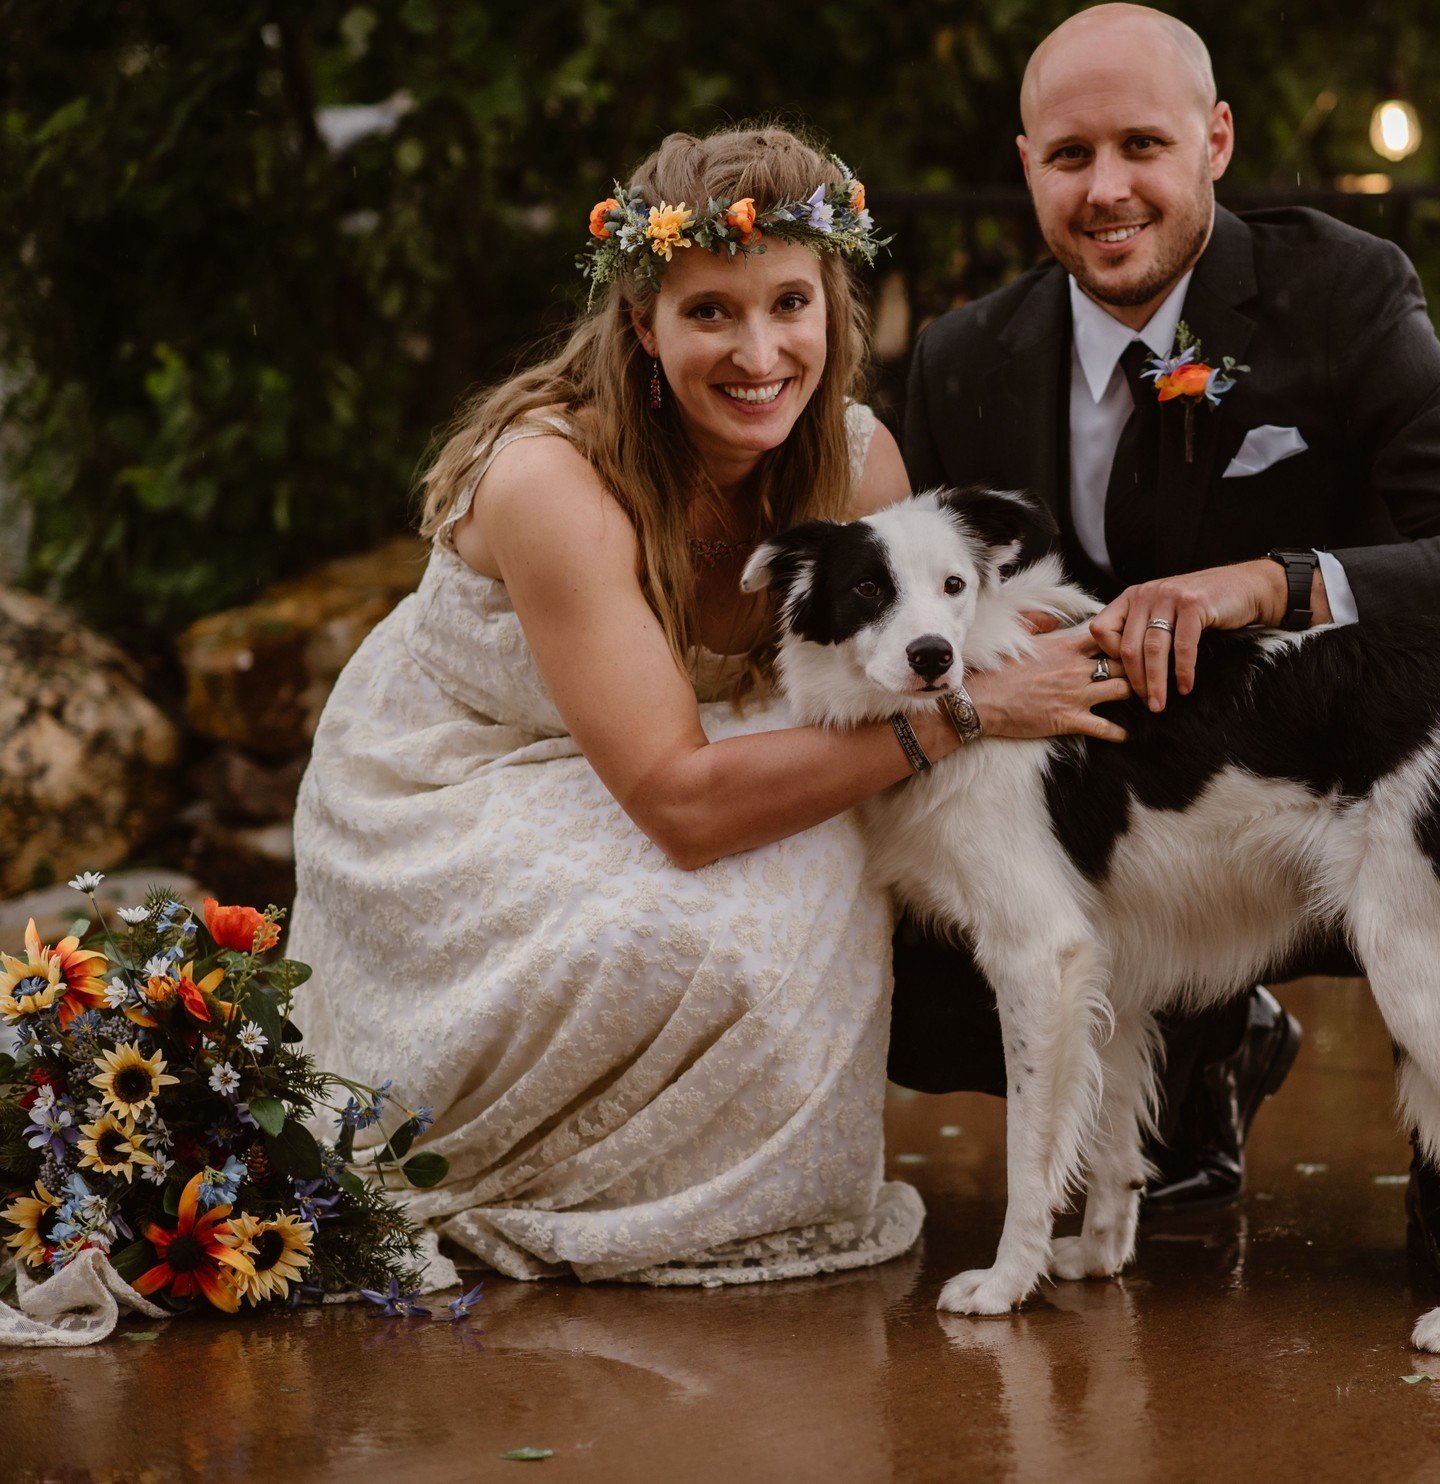 Who said weddings are just for humans? This loyal companion steals the spotlight in this heartwarming moment. Here's to love, laughter, and the joy of celebrating with our beloved four-legged friends! 🐾🤍
&bull;
&bull;
&bull;
&bull;
#dogsinweddings 